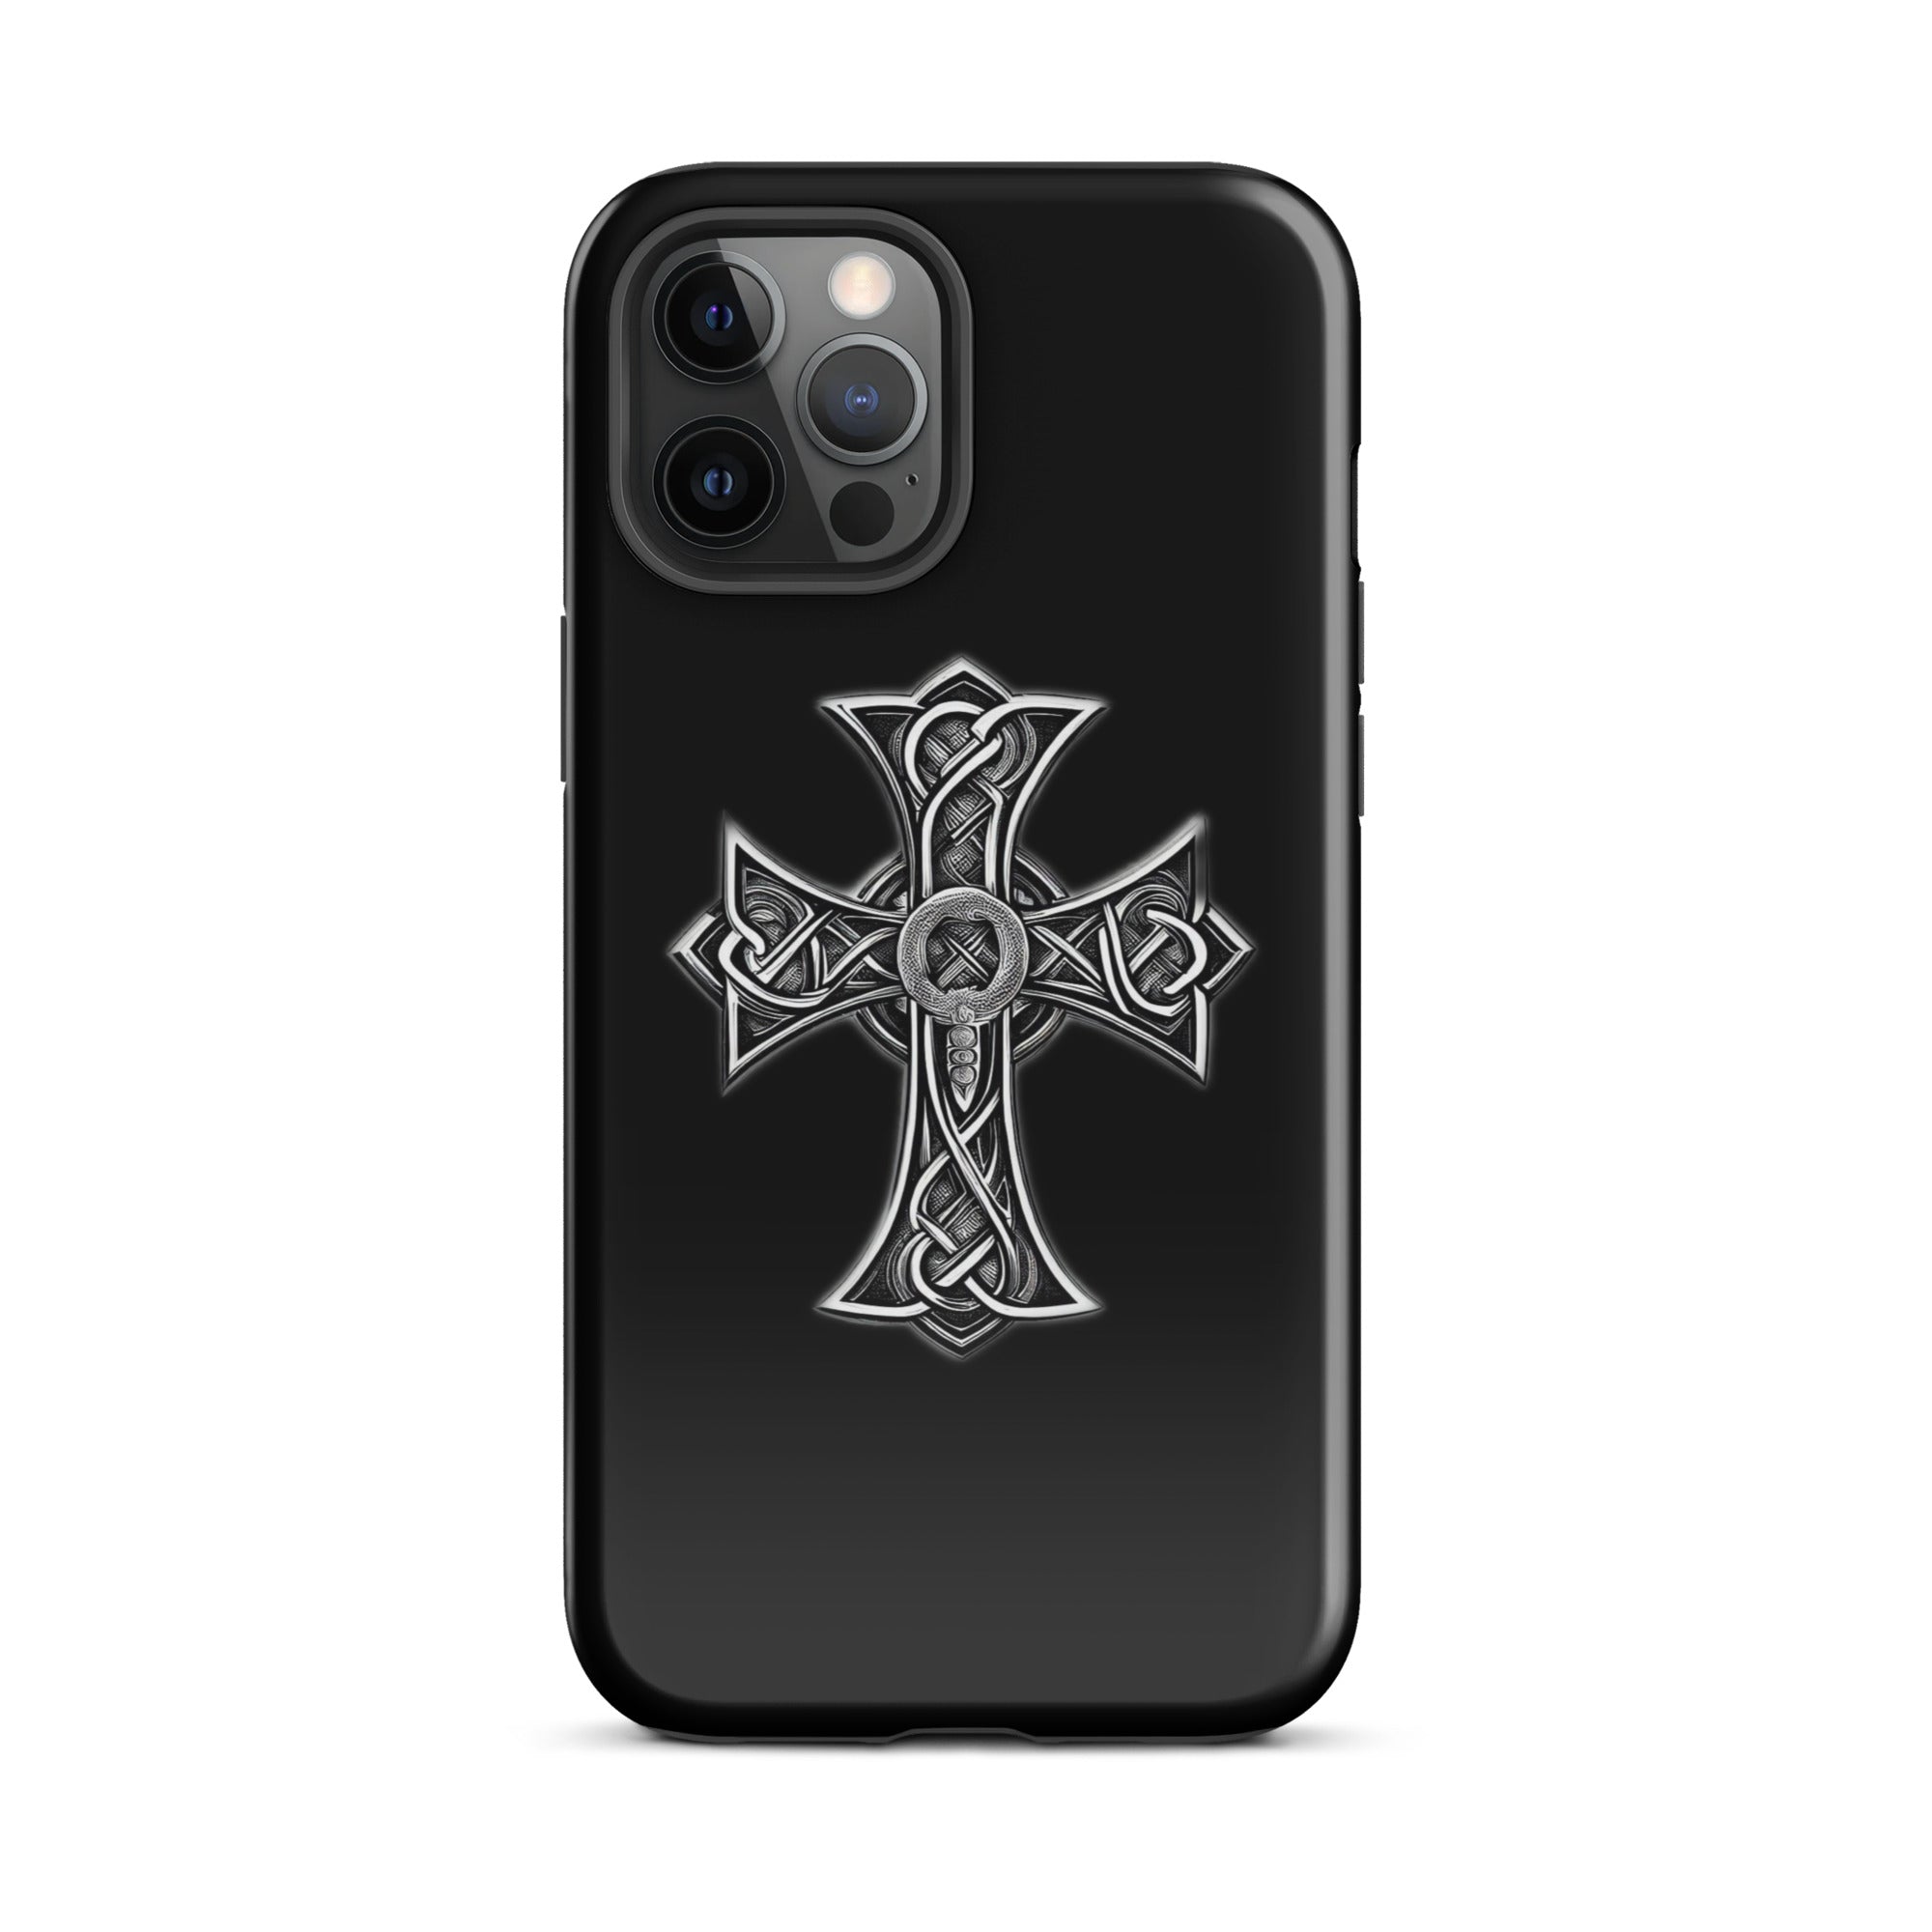 tough-case-for-iphone-glossy-iphone-12-pro-max-front-6563851a37710.jpg